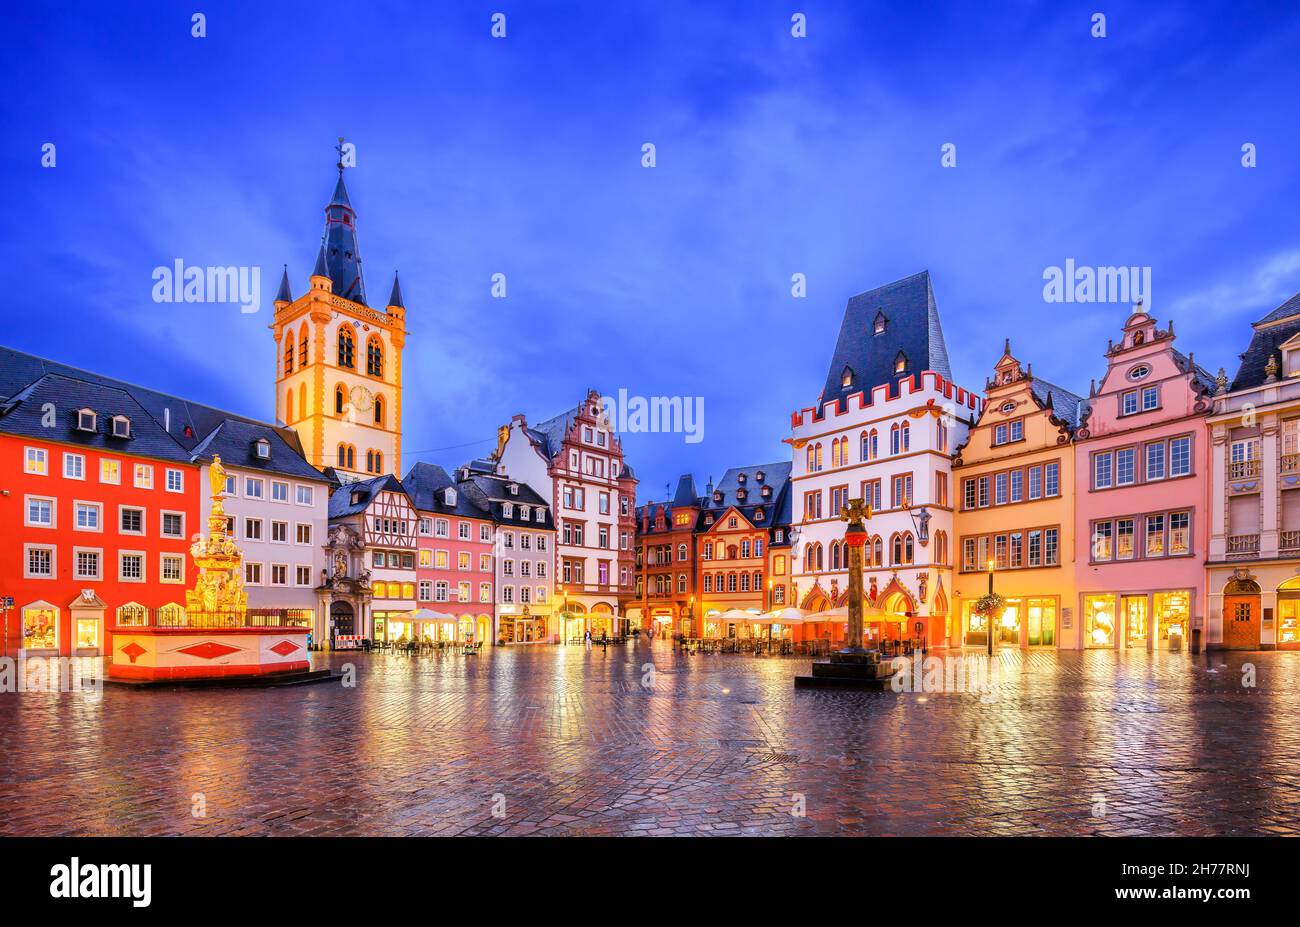 Trier, Germany. Hauptmarkt market square and St. Gangolf church. Stock Photo